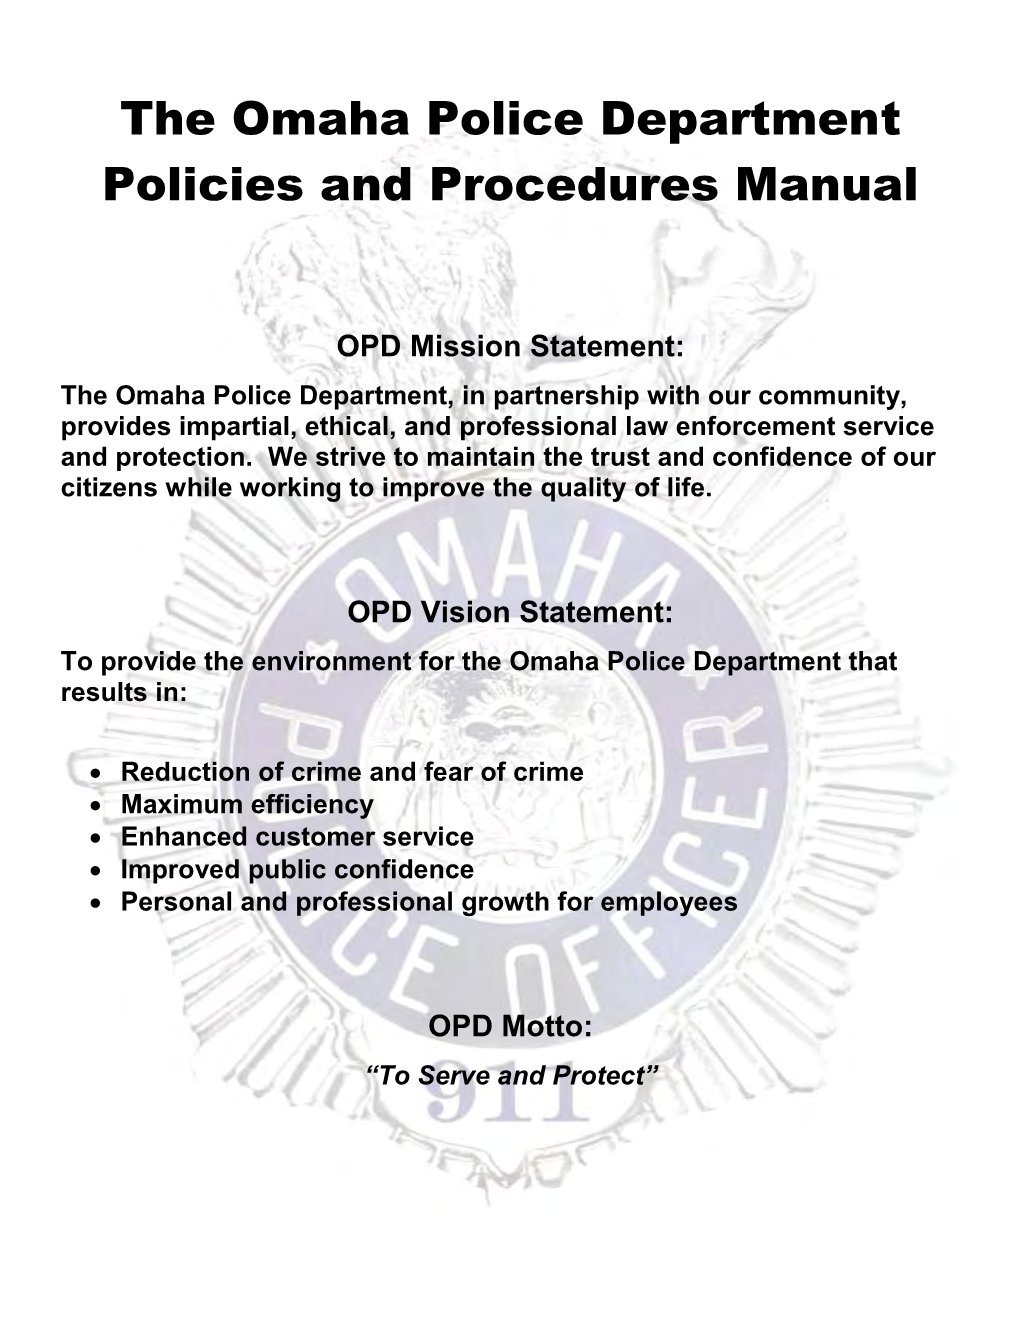 The Omaha Police Department Policies and Procedures Manual